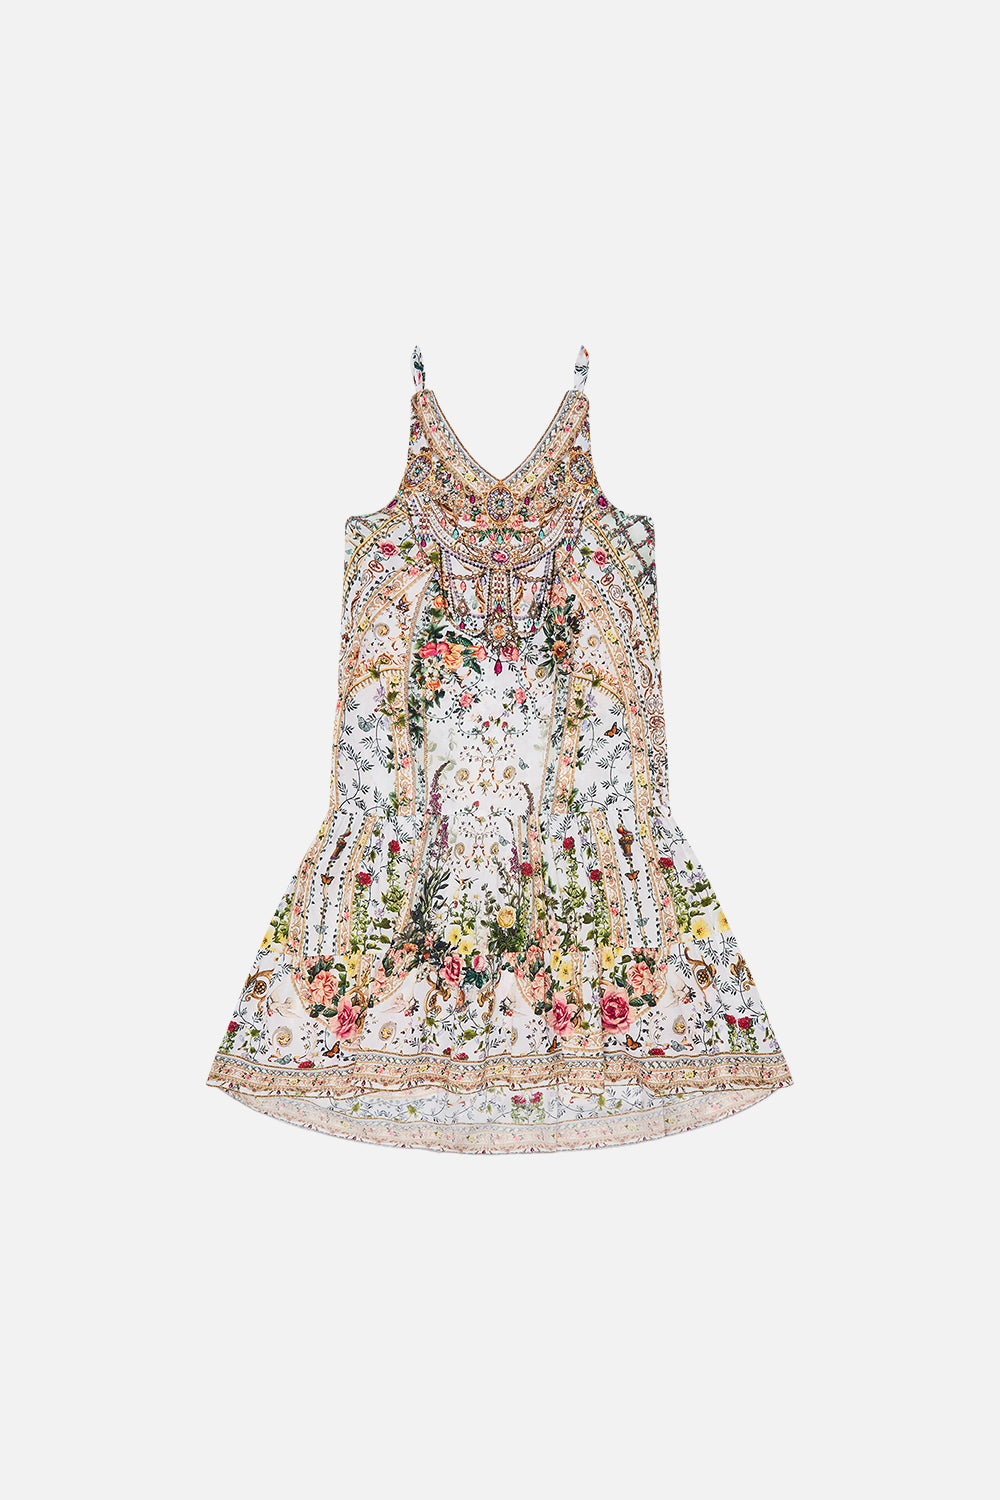 Product image of Milla By CAMILLA kids floral dress in Renaissance Romance print